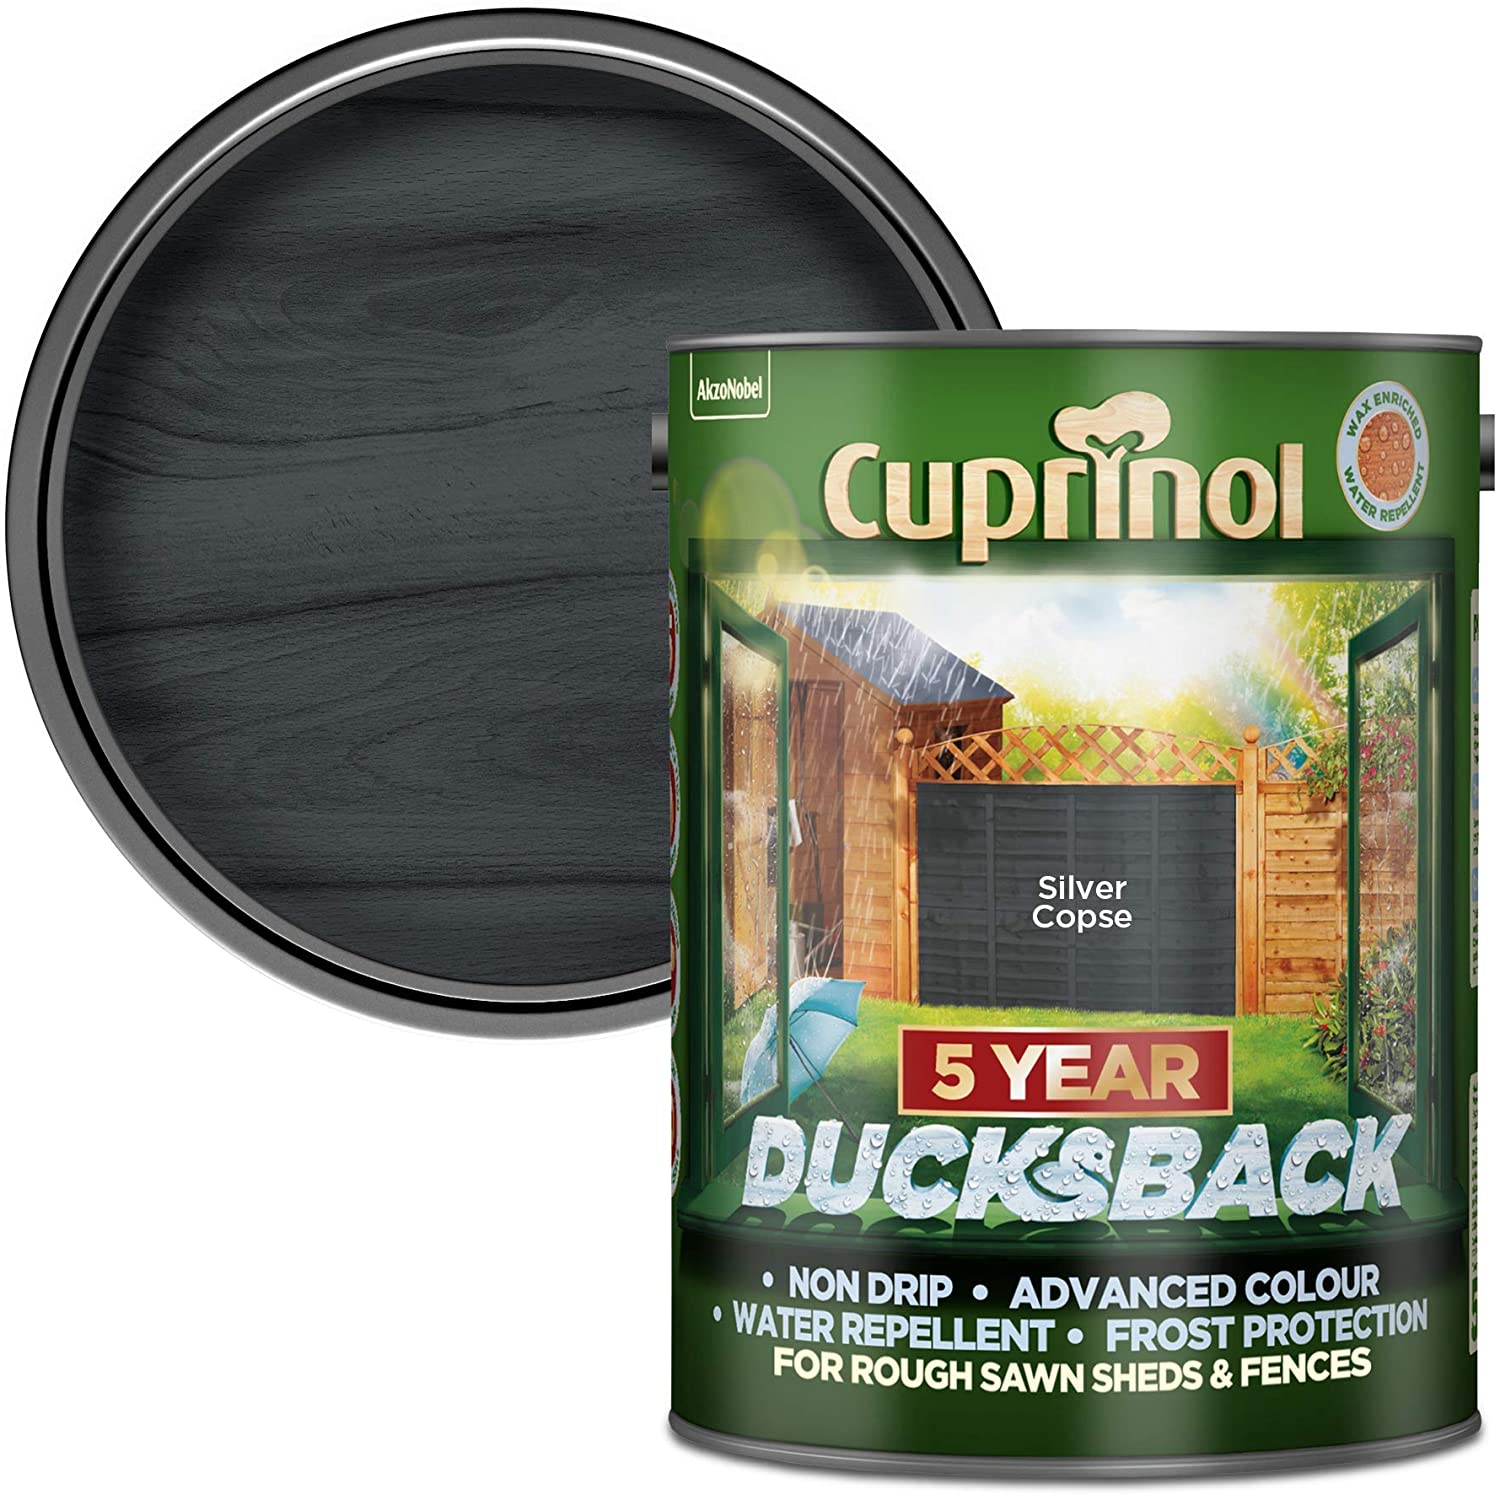 Cuprinol-Ducksback-5-Year-Waterproof-for-Sheds-and-Fences-Silver-Copse-5-Litre